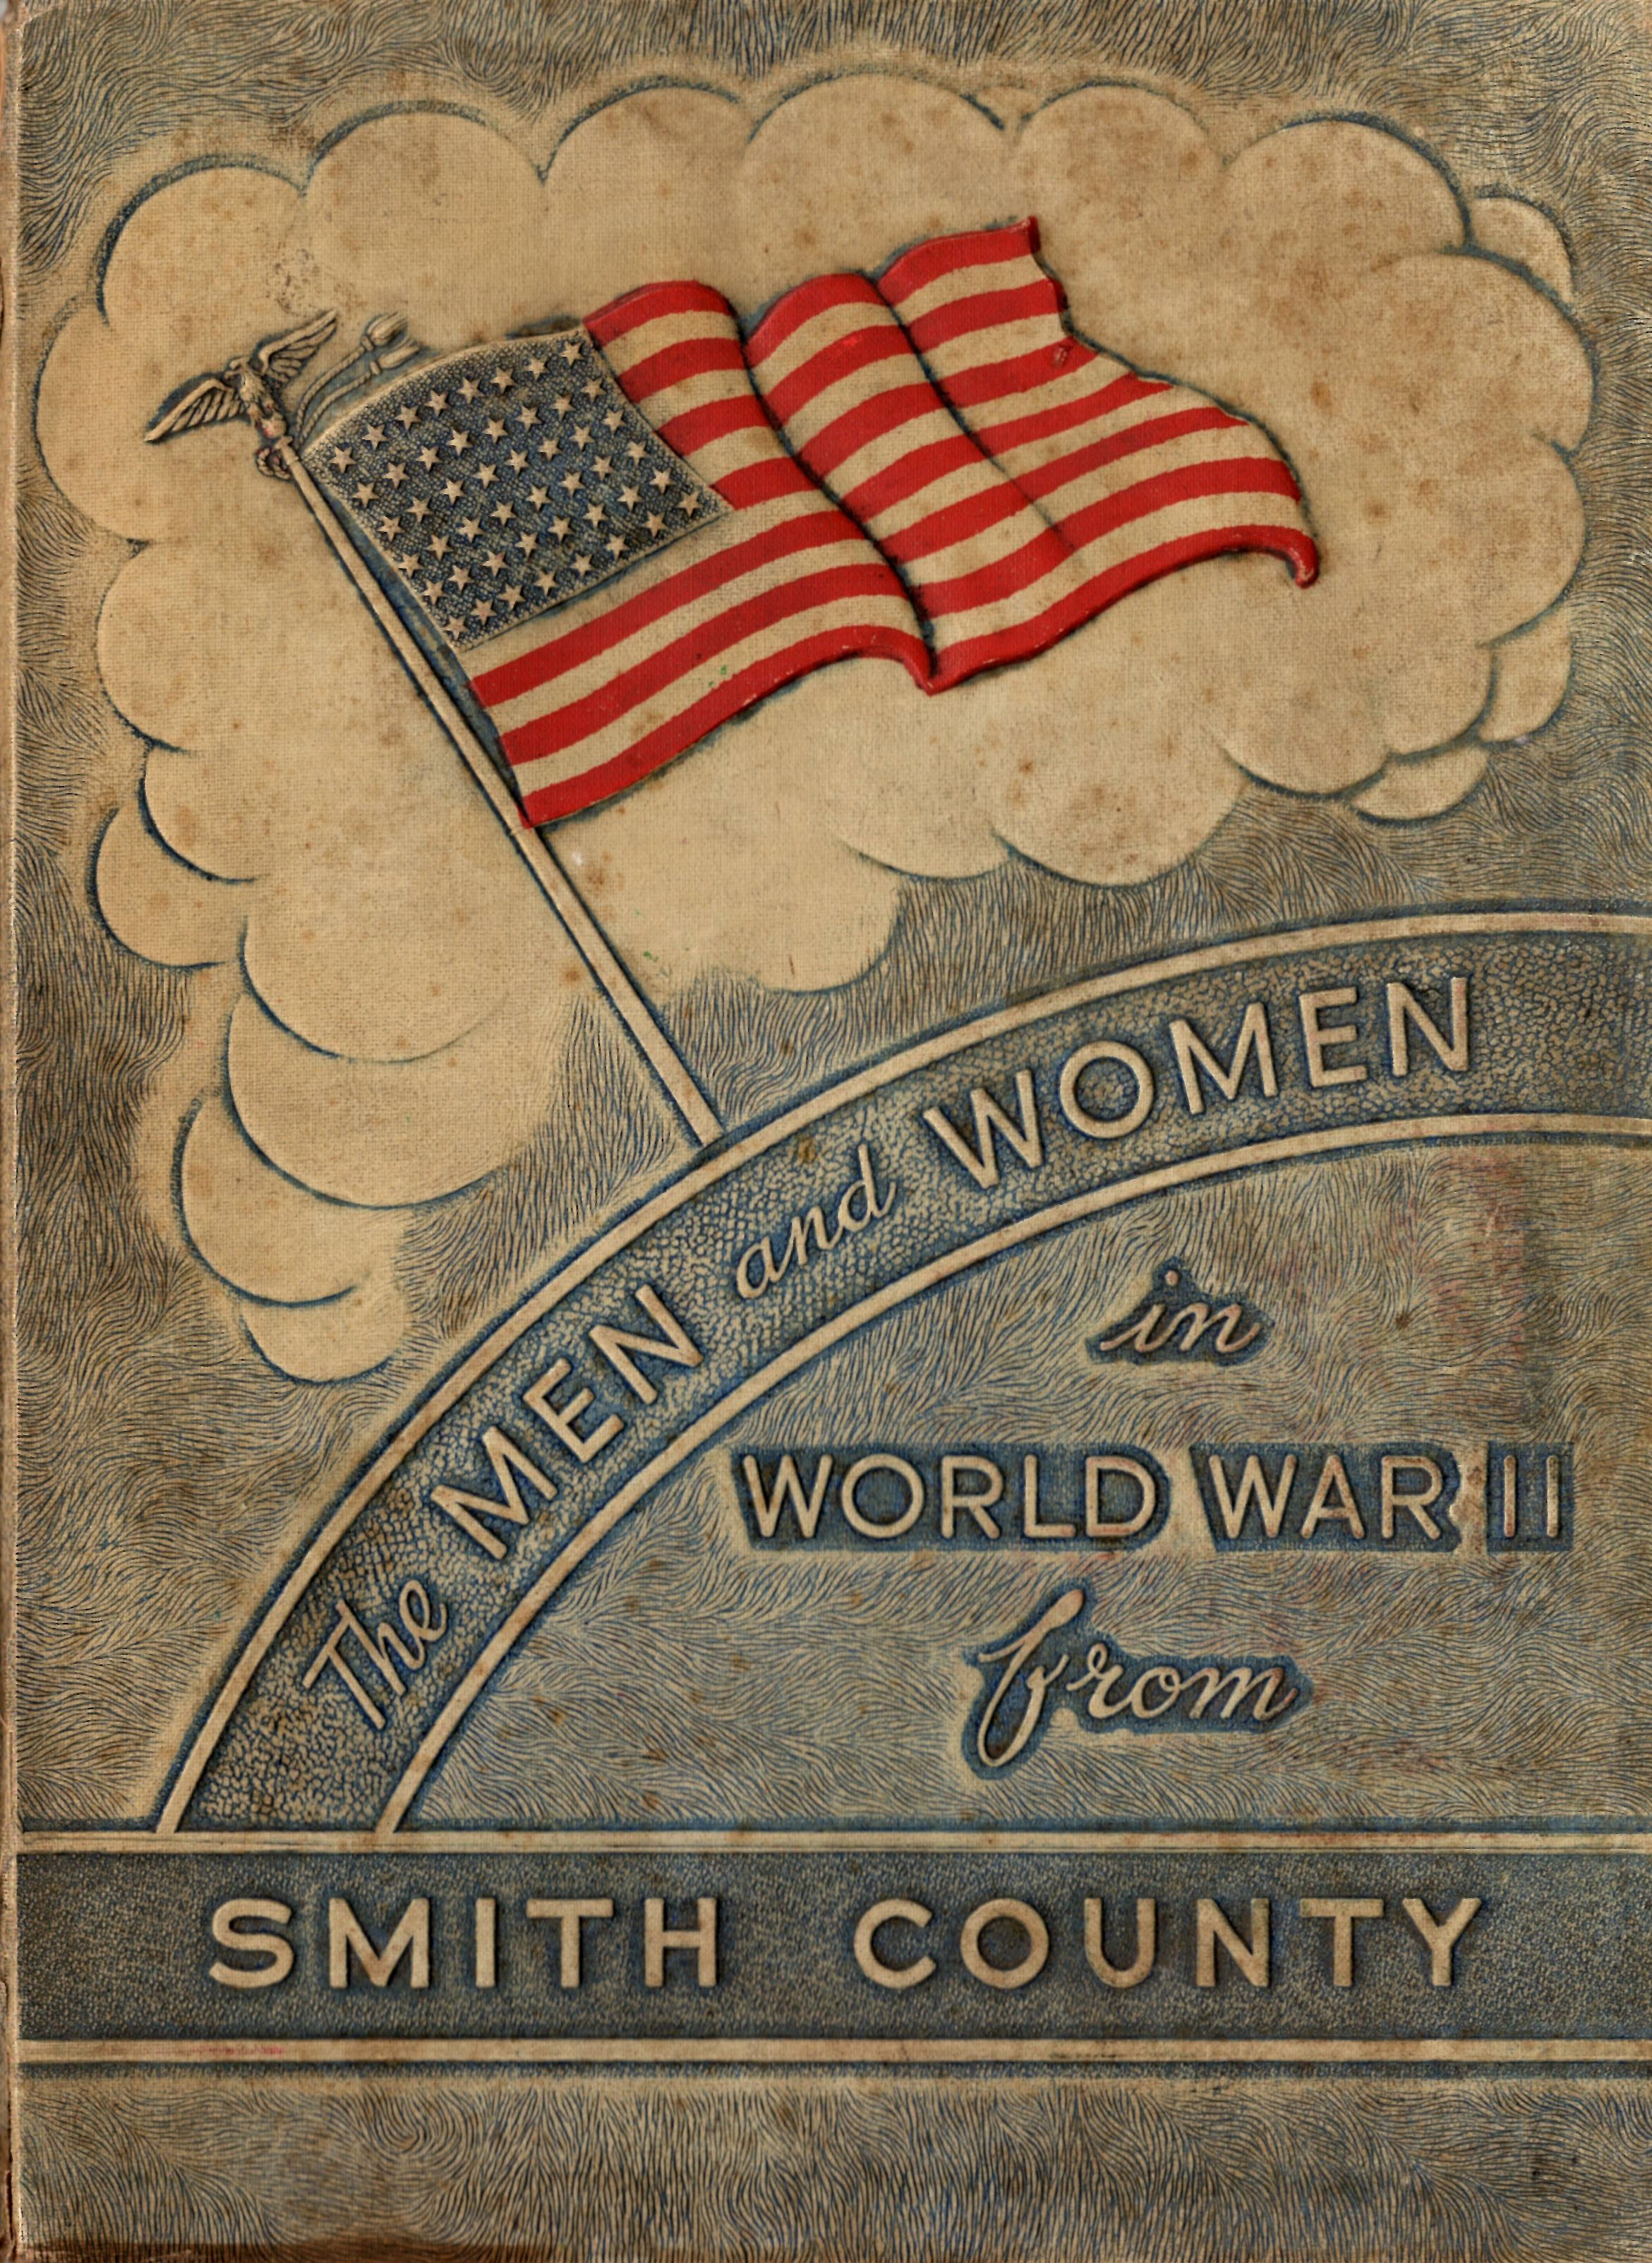 Men and women in the Armed Forces from Smith County Texas